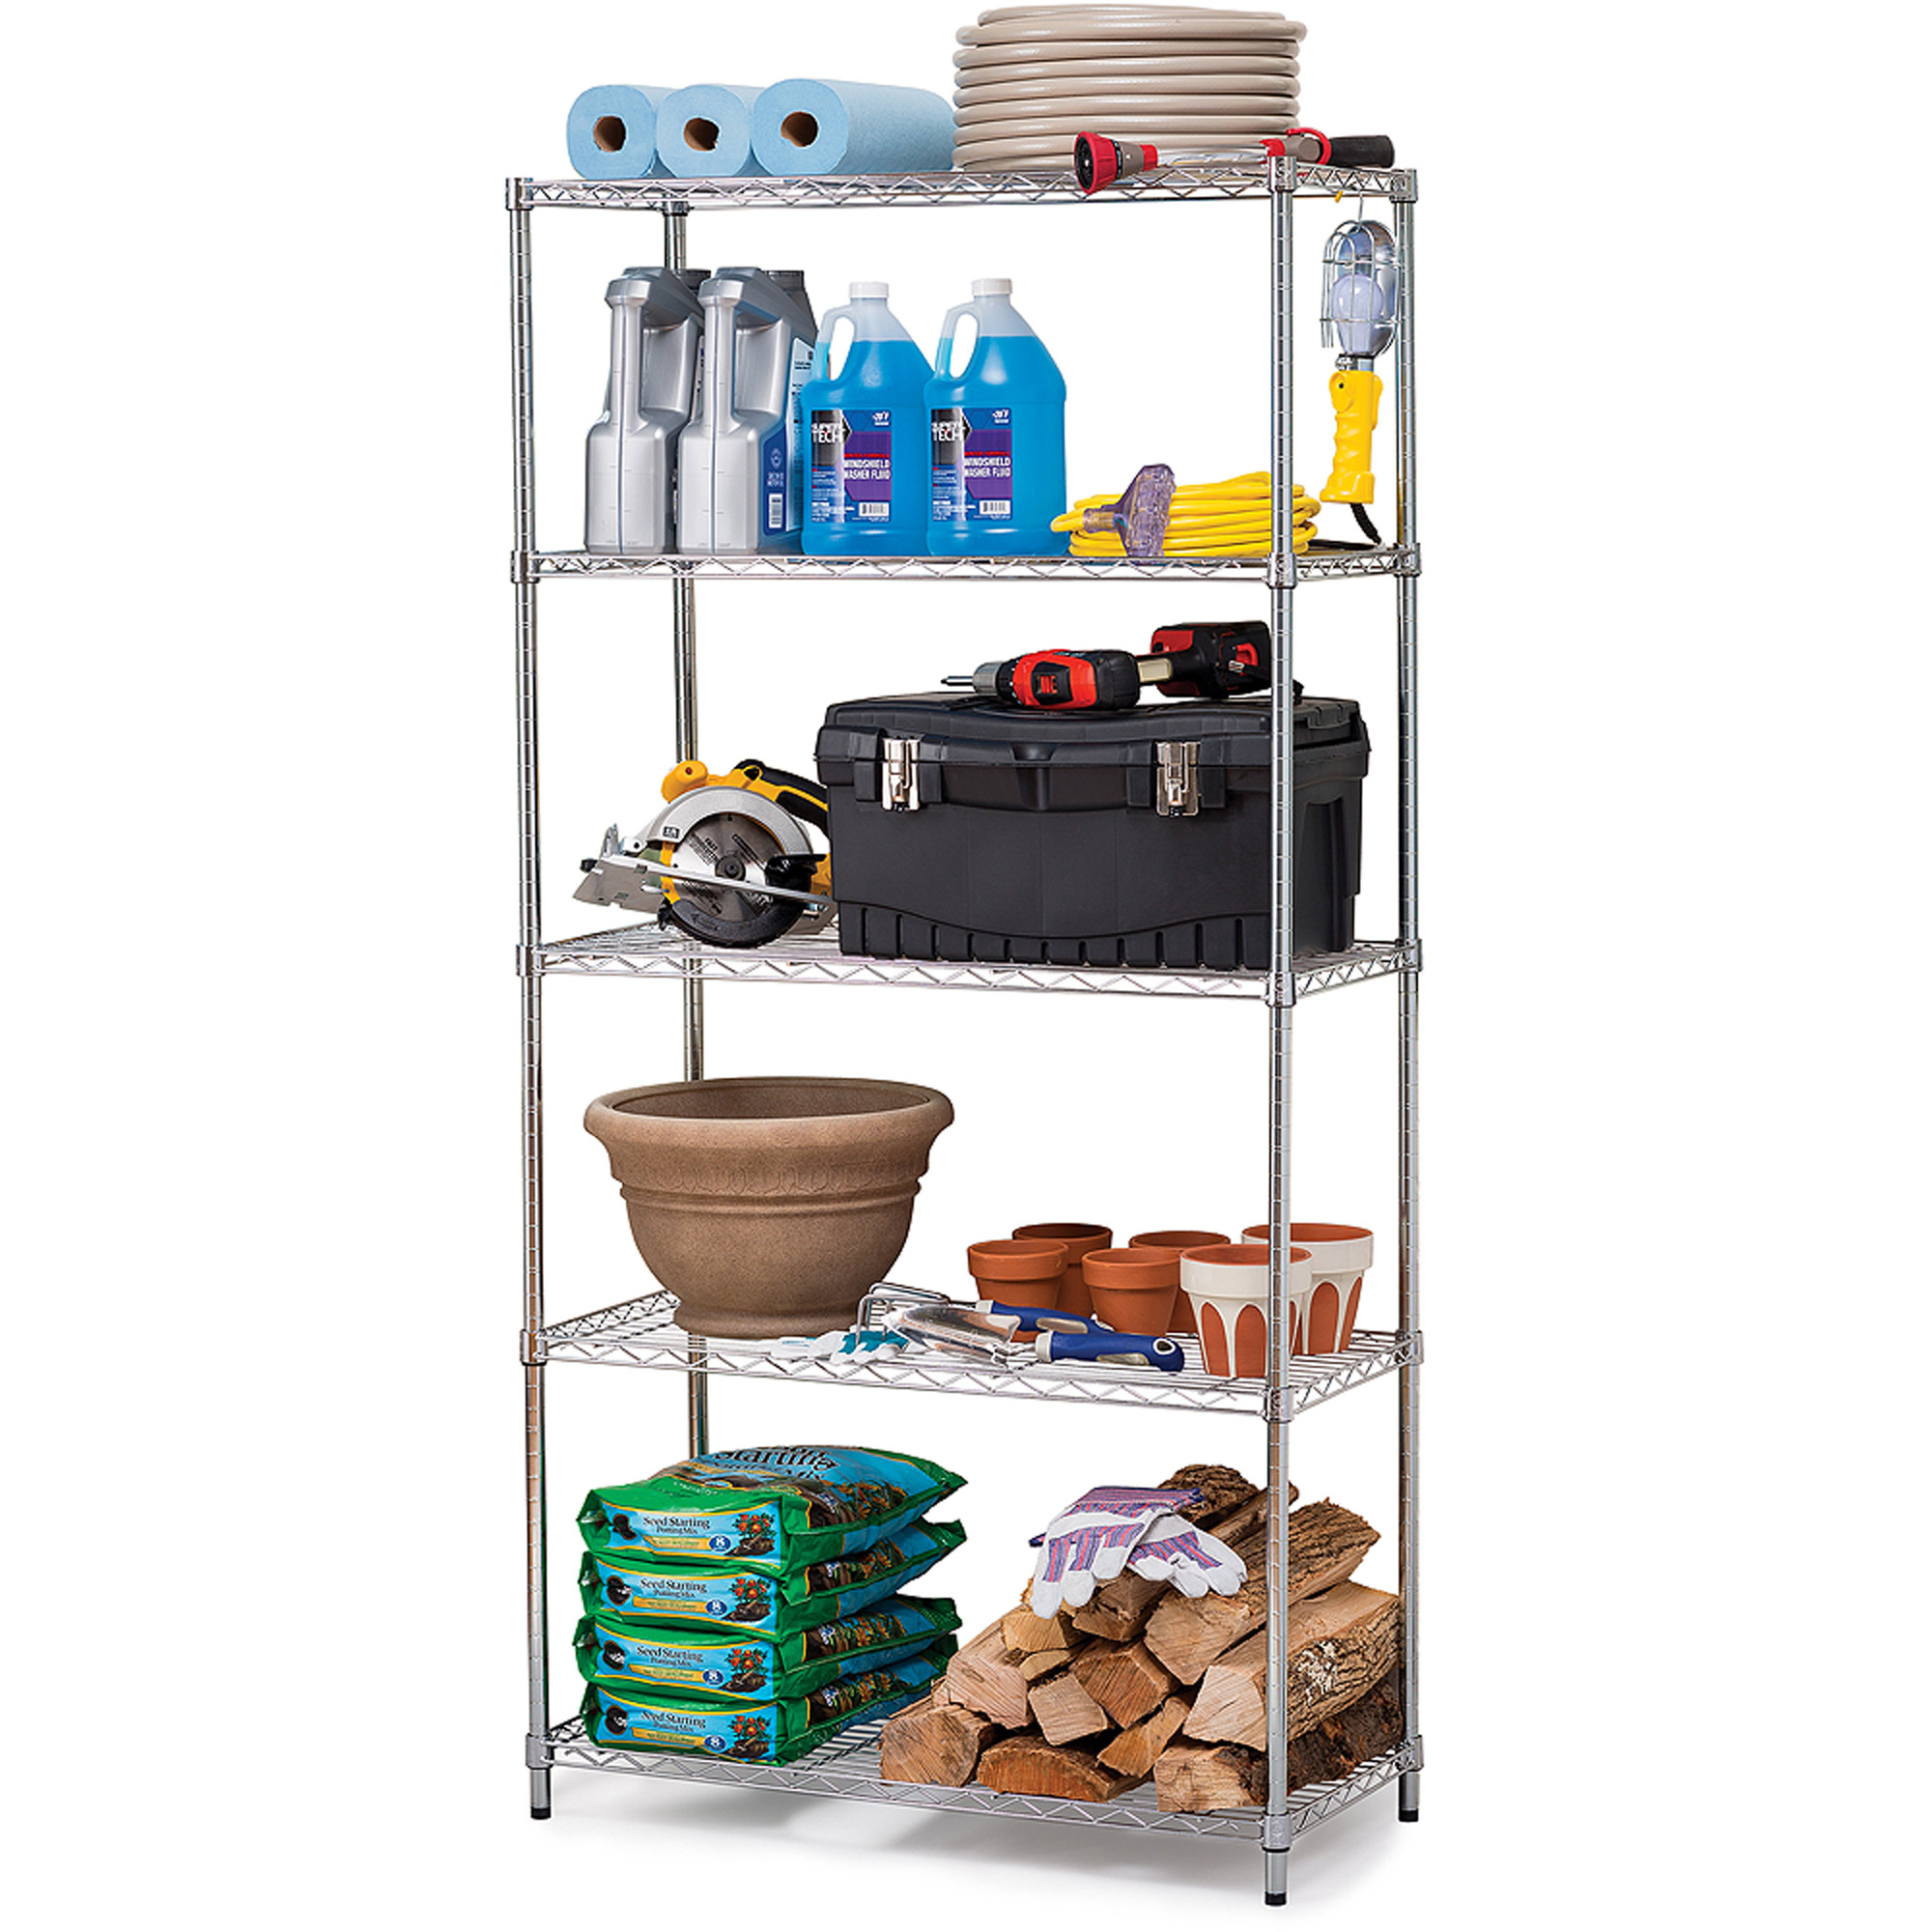 Work Choice 5-Tier Commercial Wire Shelving Rack, Zinc - image 1 of 1